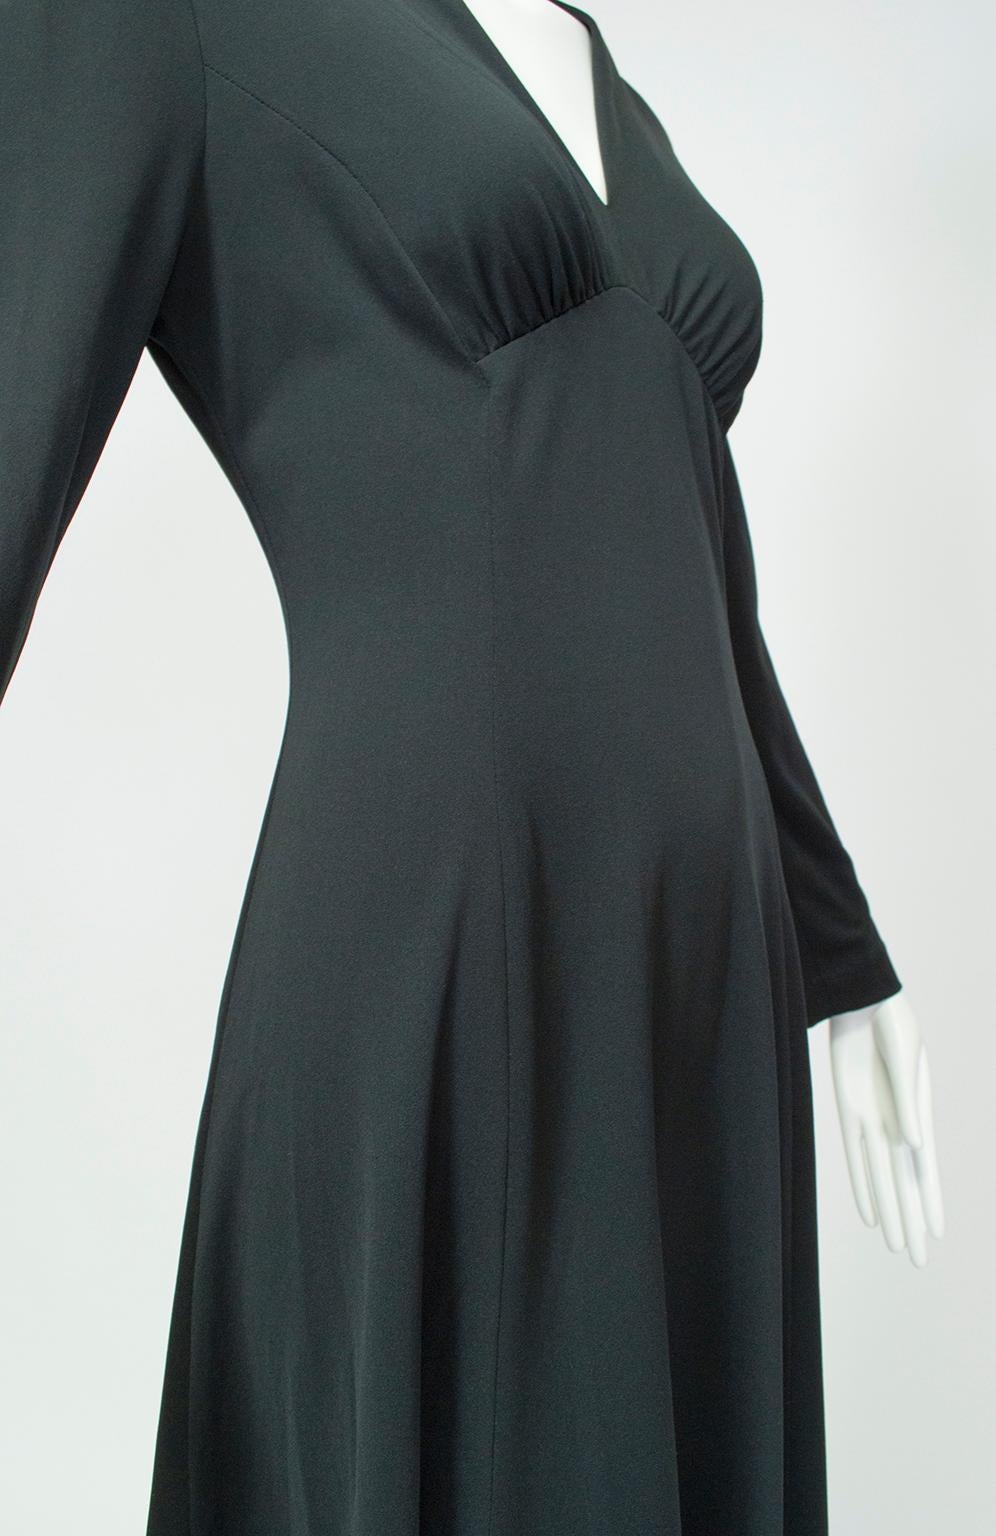 Swirling Black Jersey Disco Day Dress with Plunging Bodice – M, 1960s For Sale 2